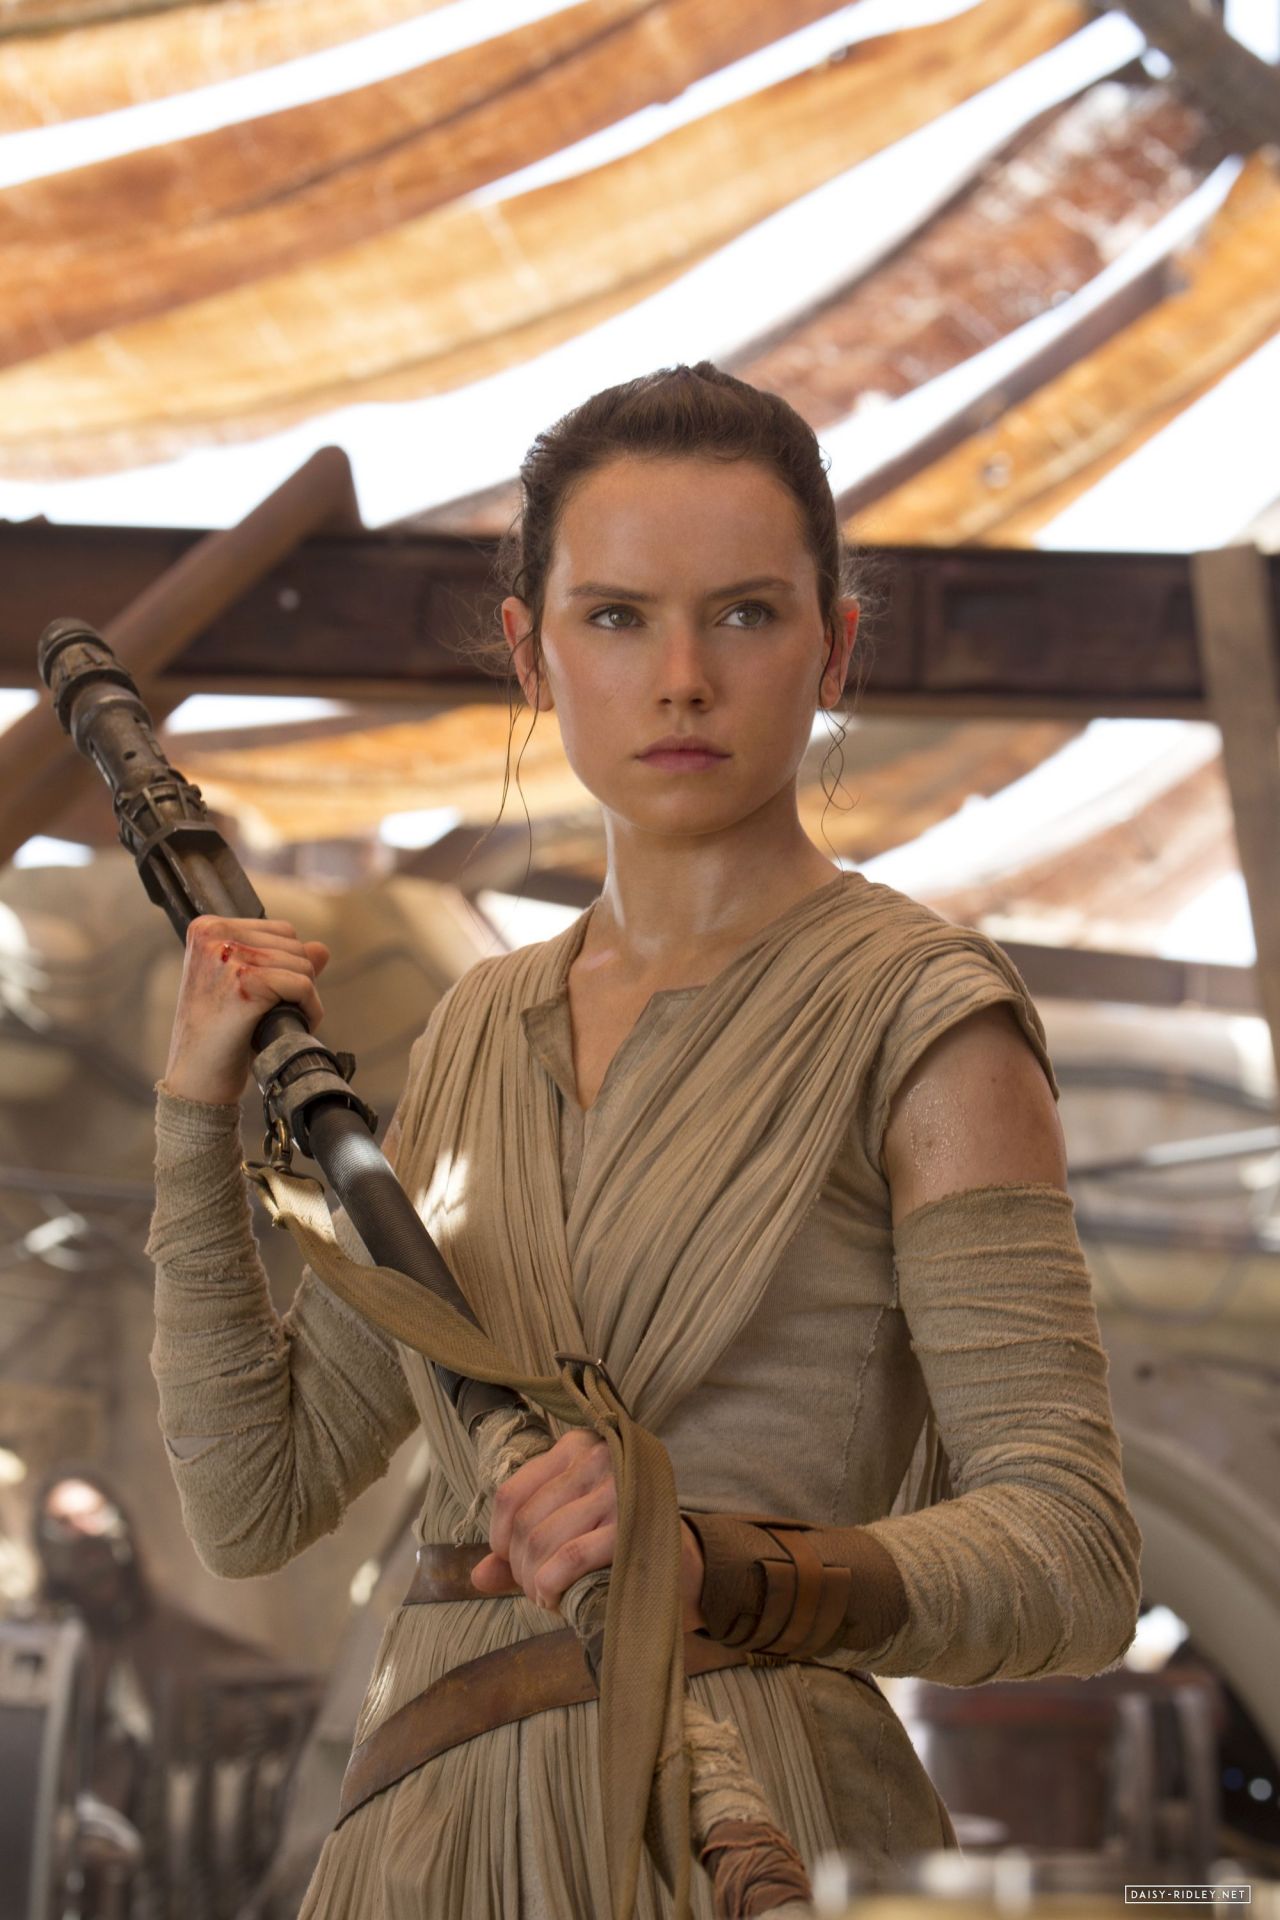 Daisy Ridley Star Wars The Force Awakens Poster Stills And Promos